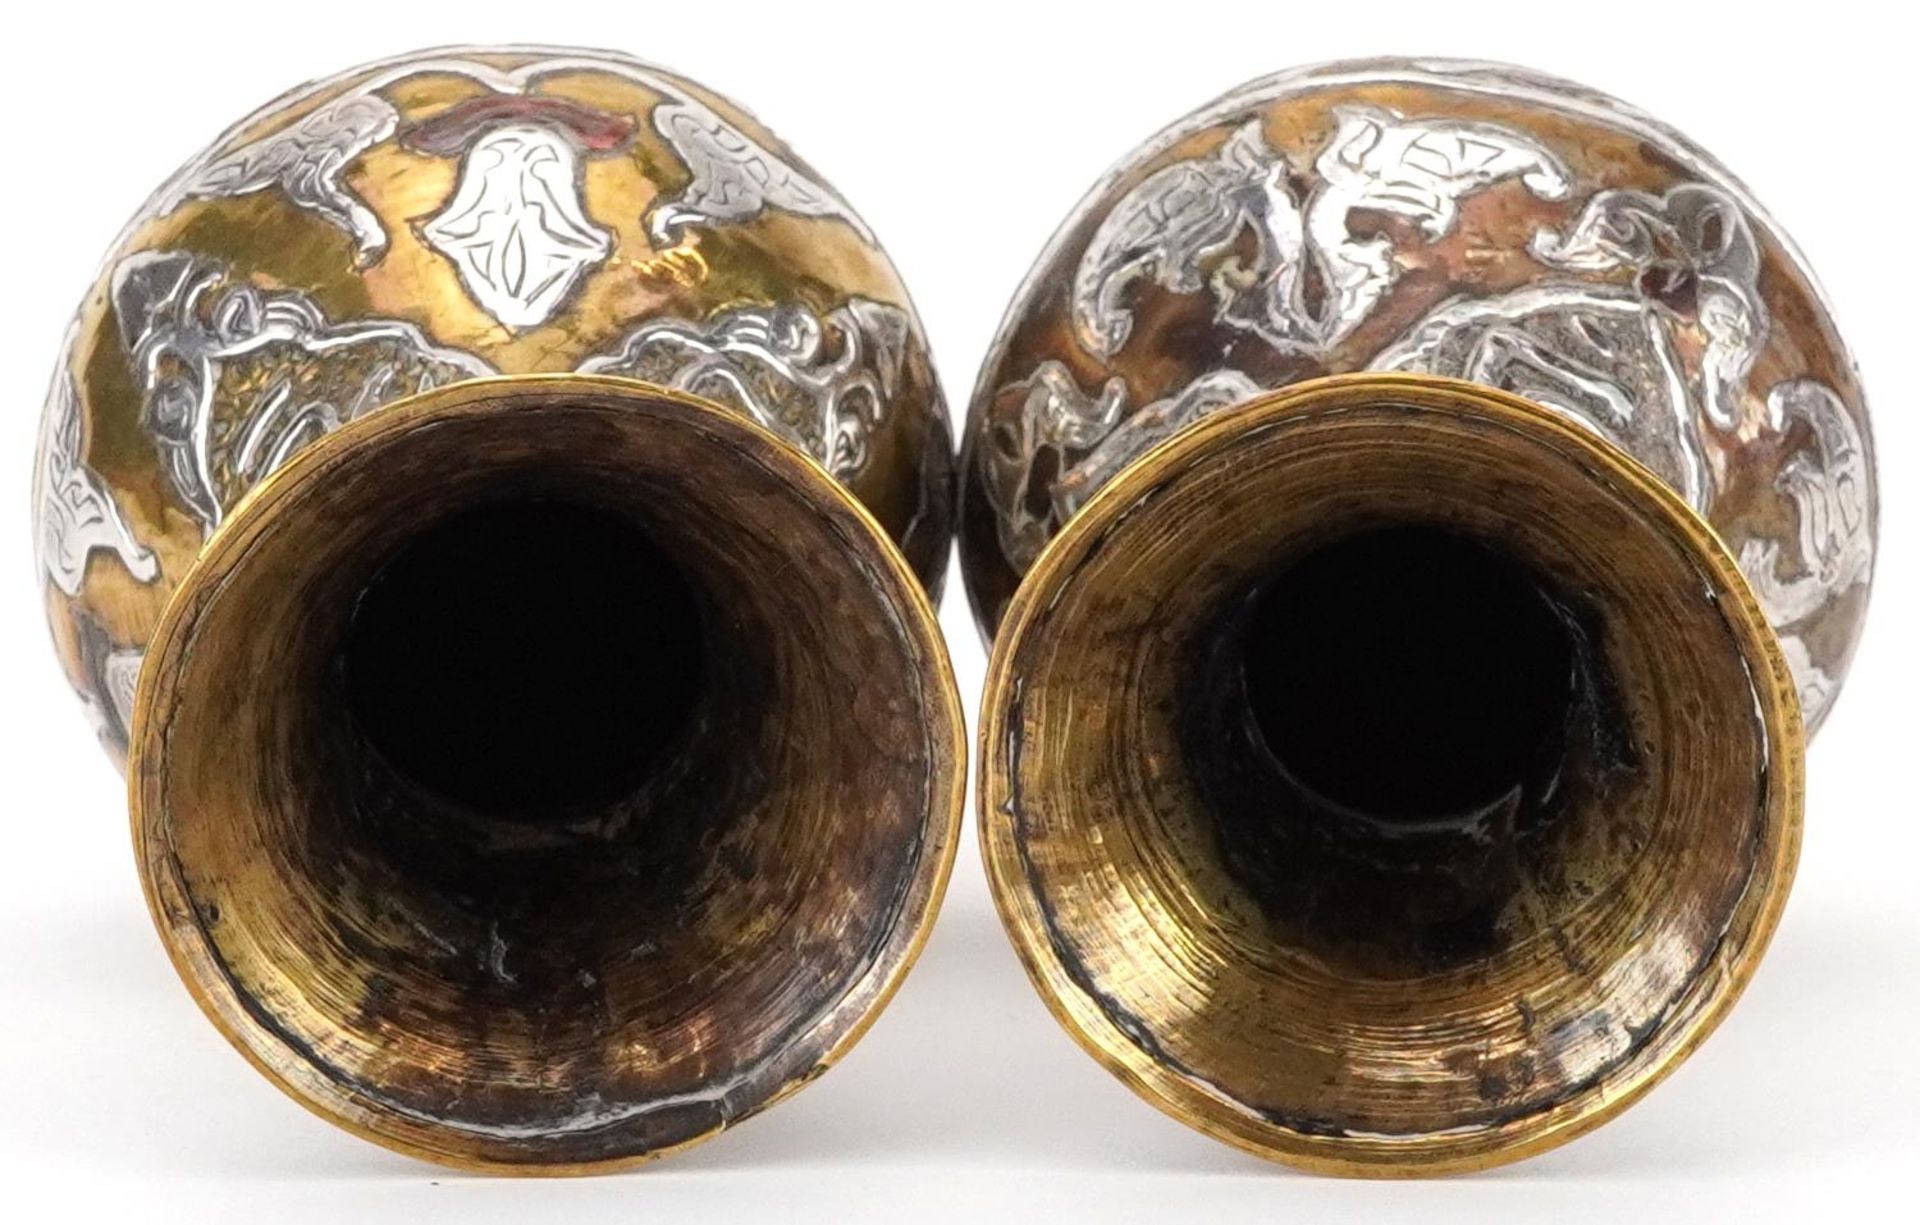 Pair of Islamic brass vases with silver foliate inlay, each 10cm high - Image 5 of 6